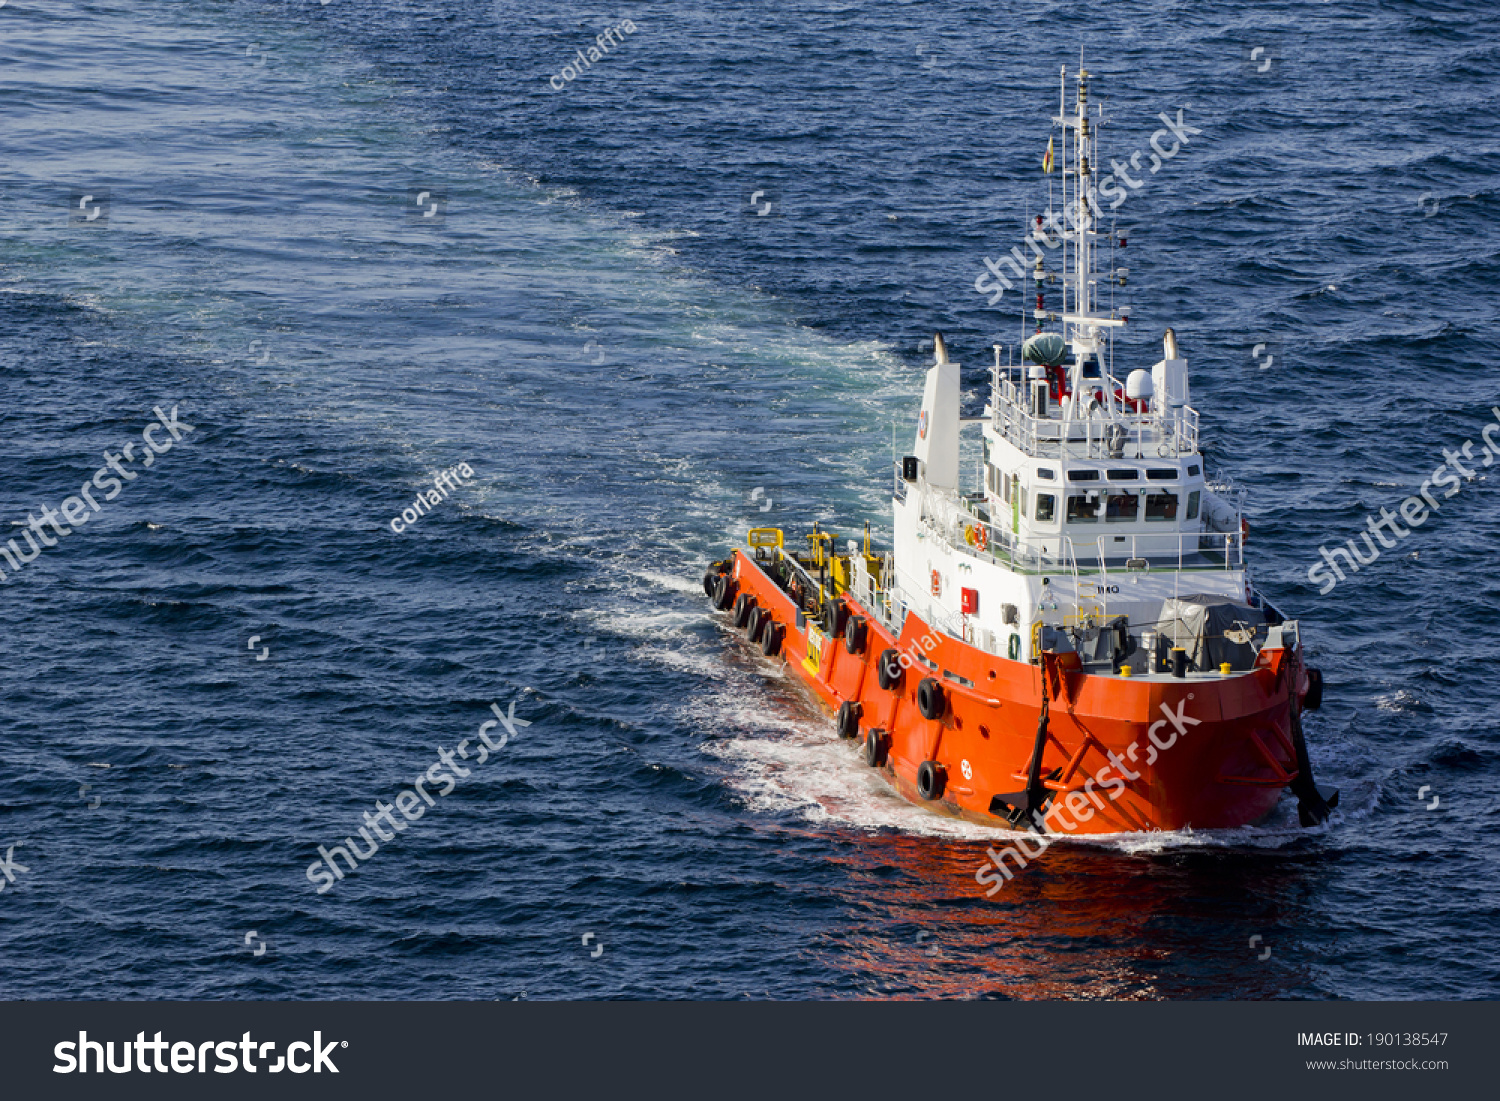 A supply boat in the midst of an open sea #190138547